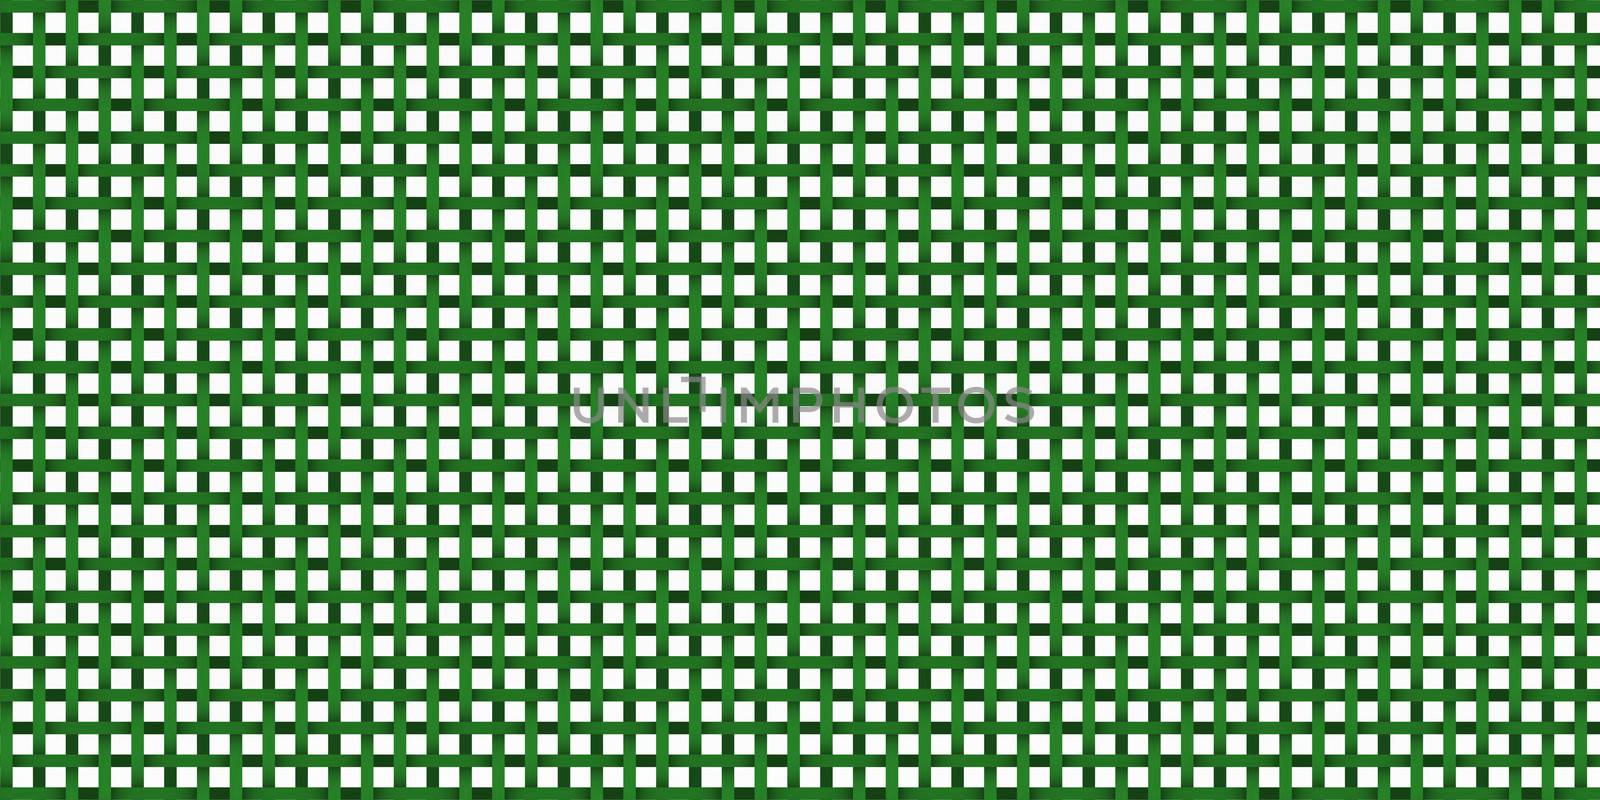 abstract background or texture green grid color by sfinks